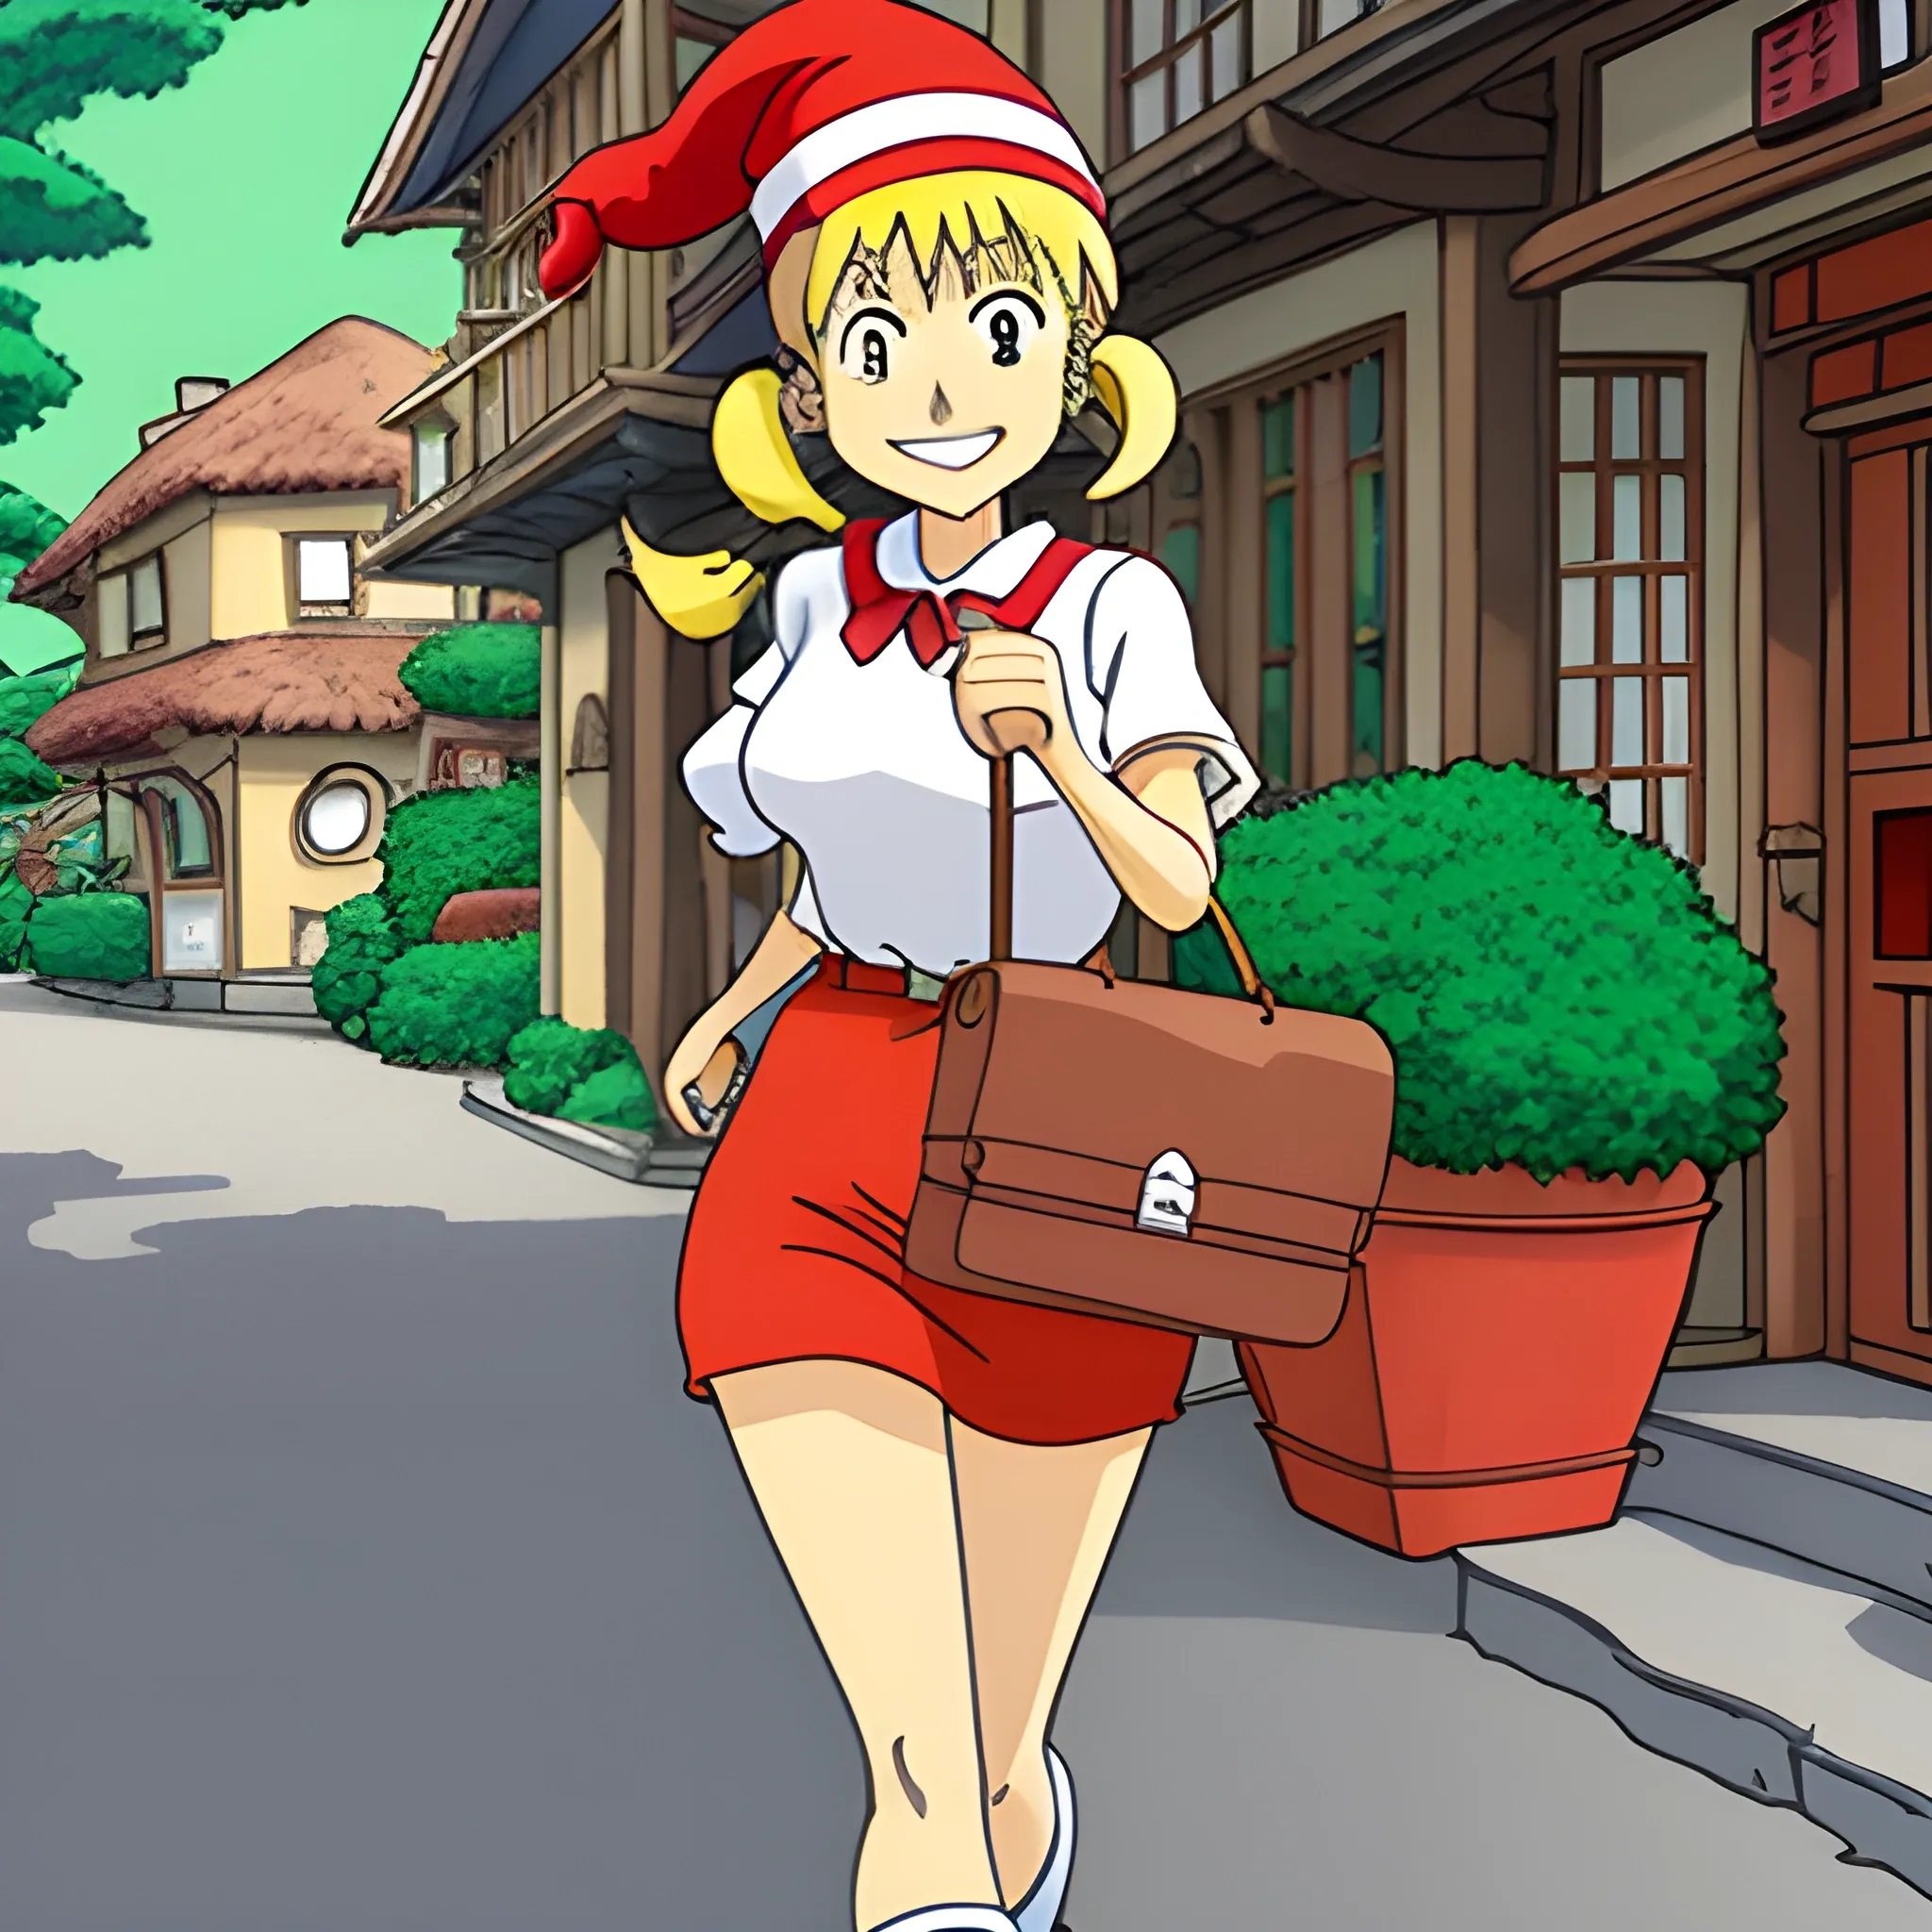 studio ghibli, where's waldo style,A very lively little girl named Keli has blonde hair and two ponytails. She runs around the village with a red schoolbag and a red hat every day, looking very happy and happy., Cartoon, Cartoon, Cartoon